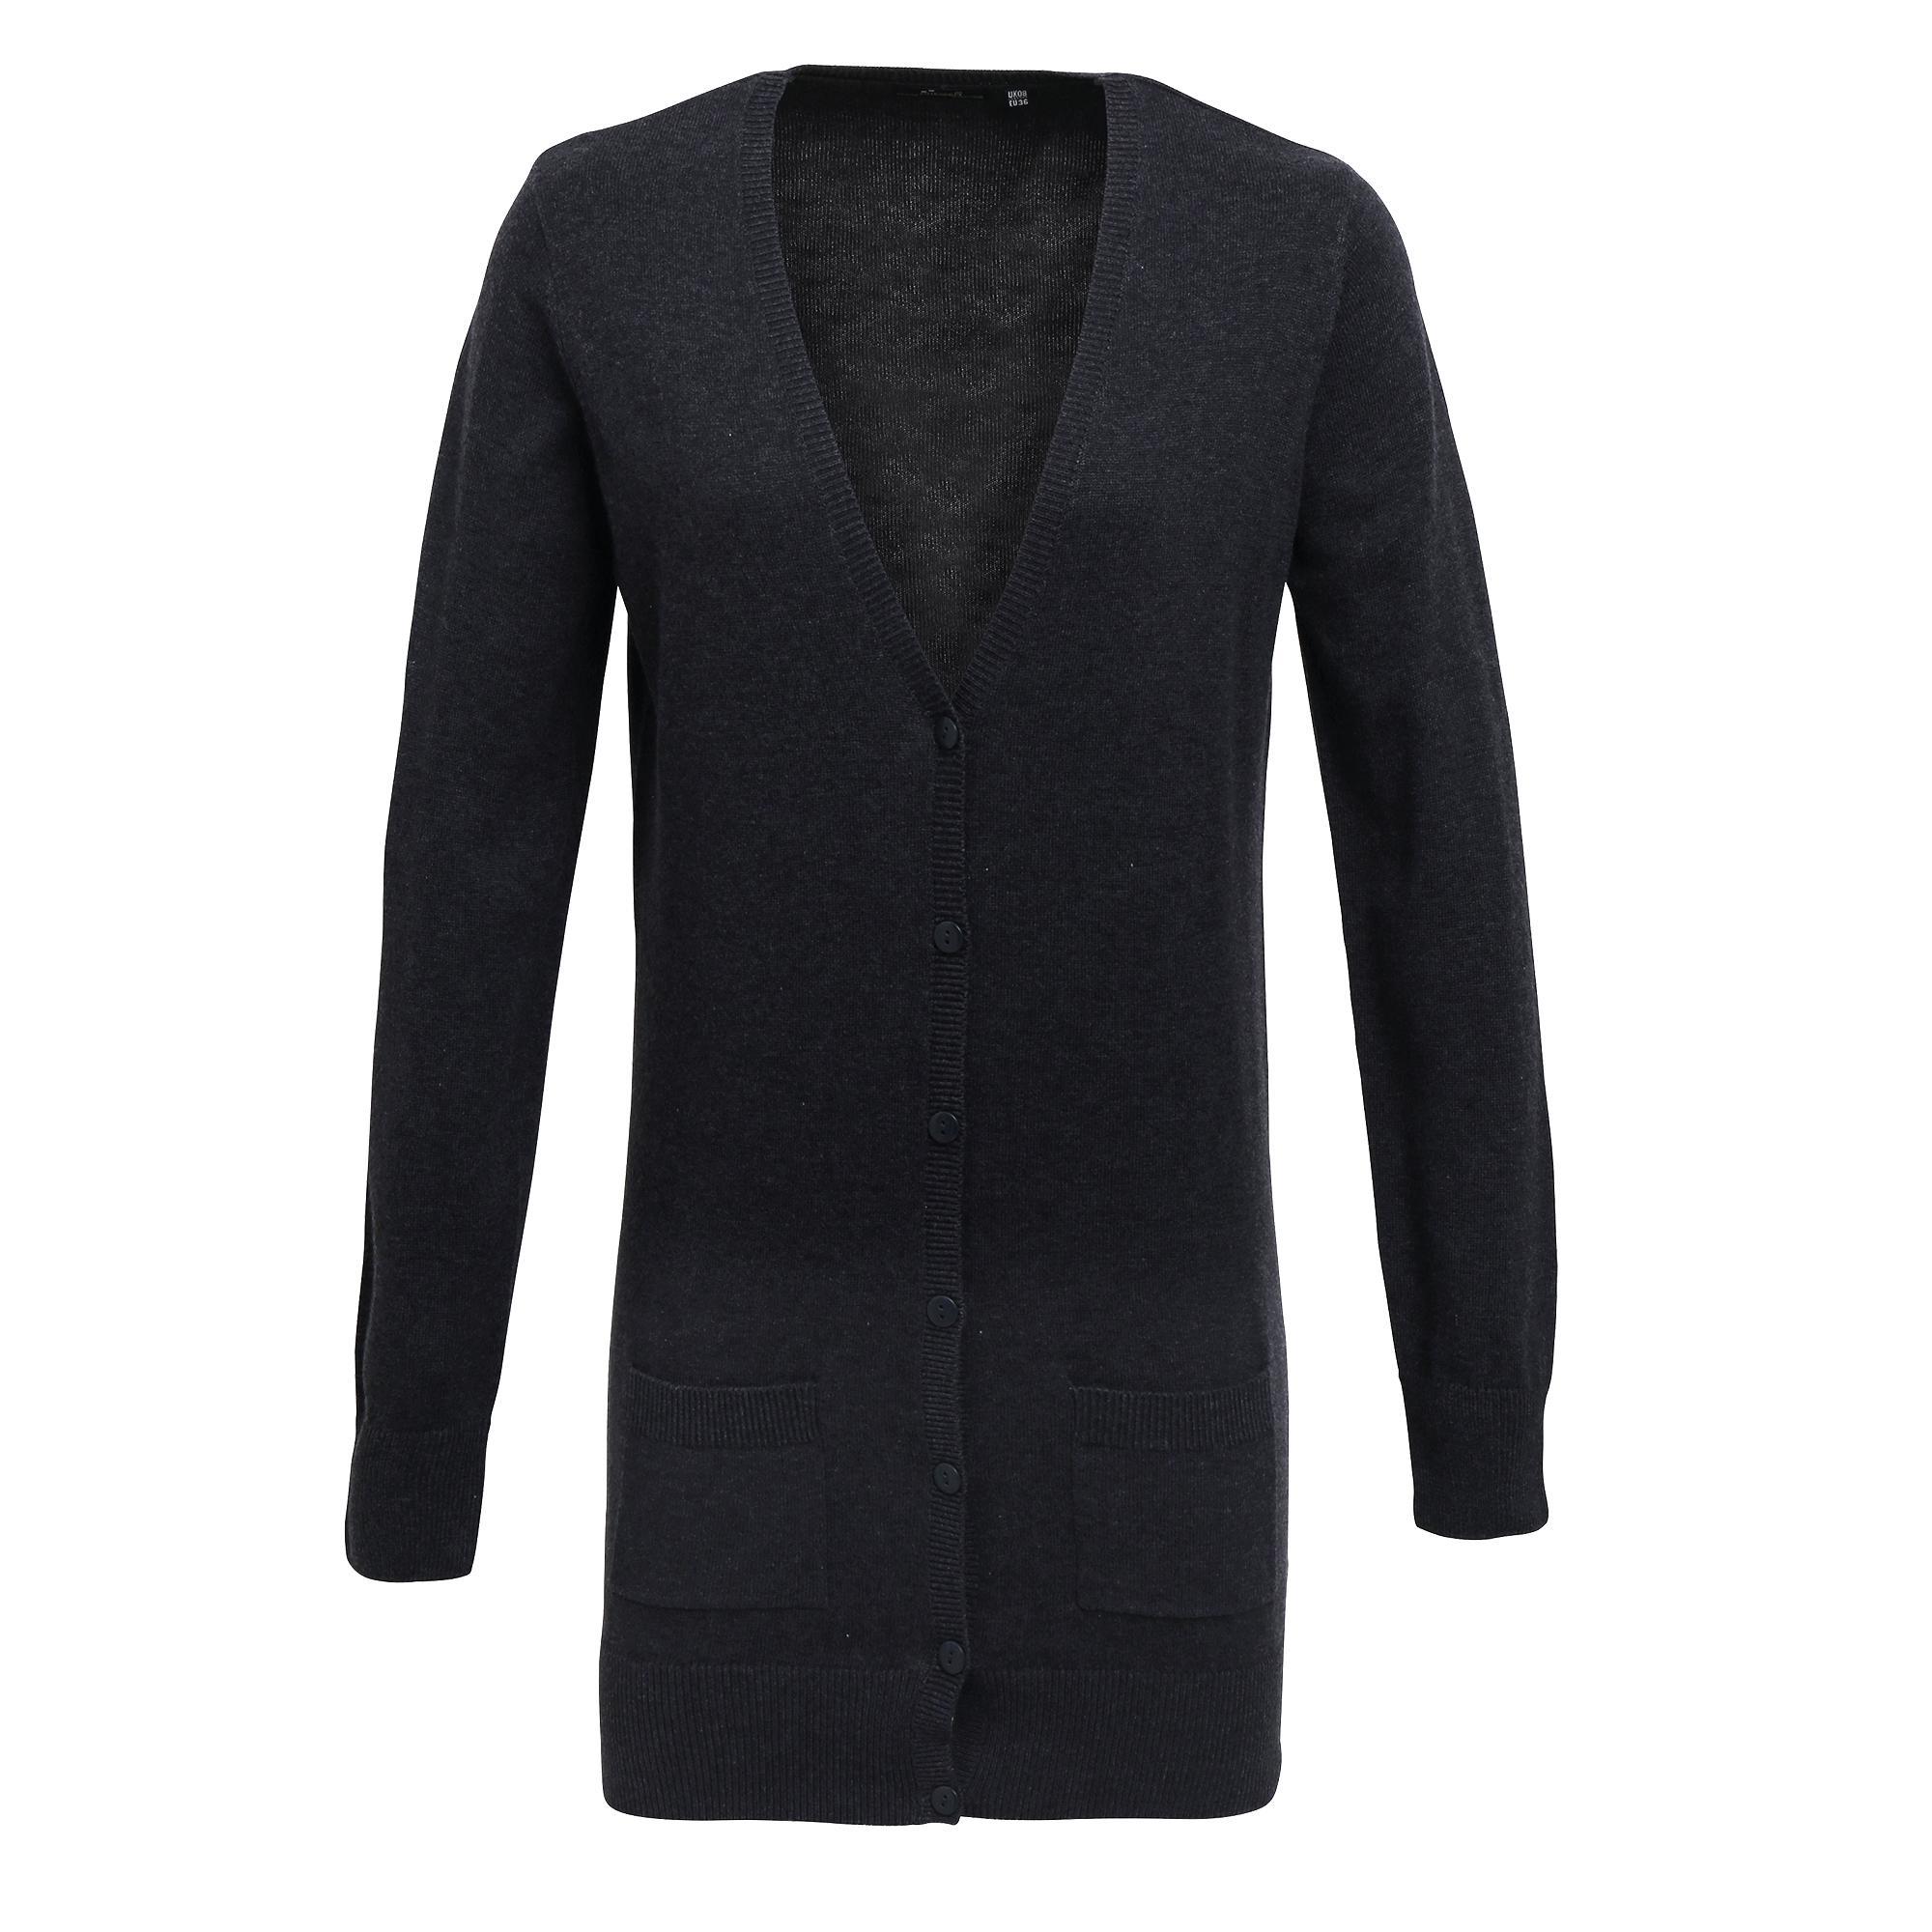 Premier Womens/Ladies Longline V Neck Knitted Cardigan (Charcoal) (18)